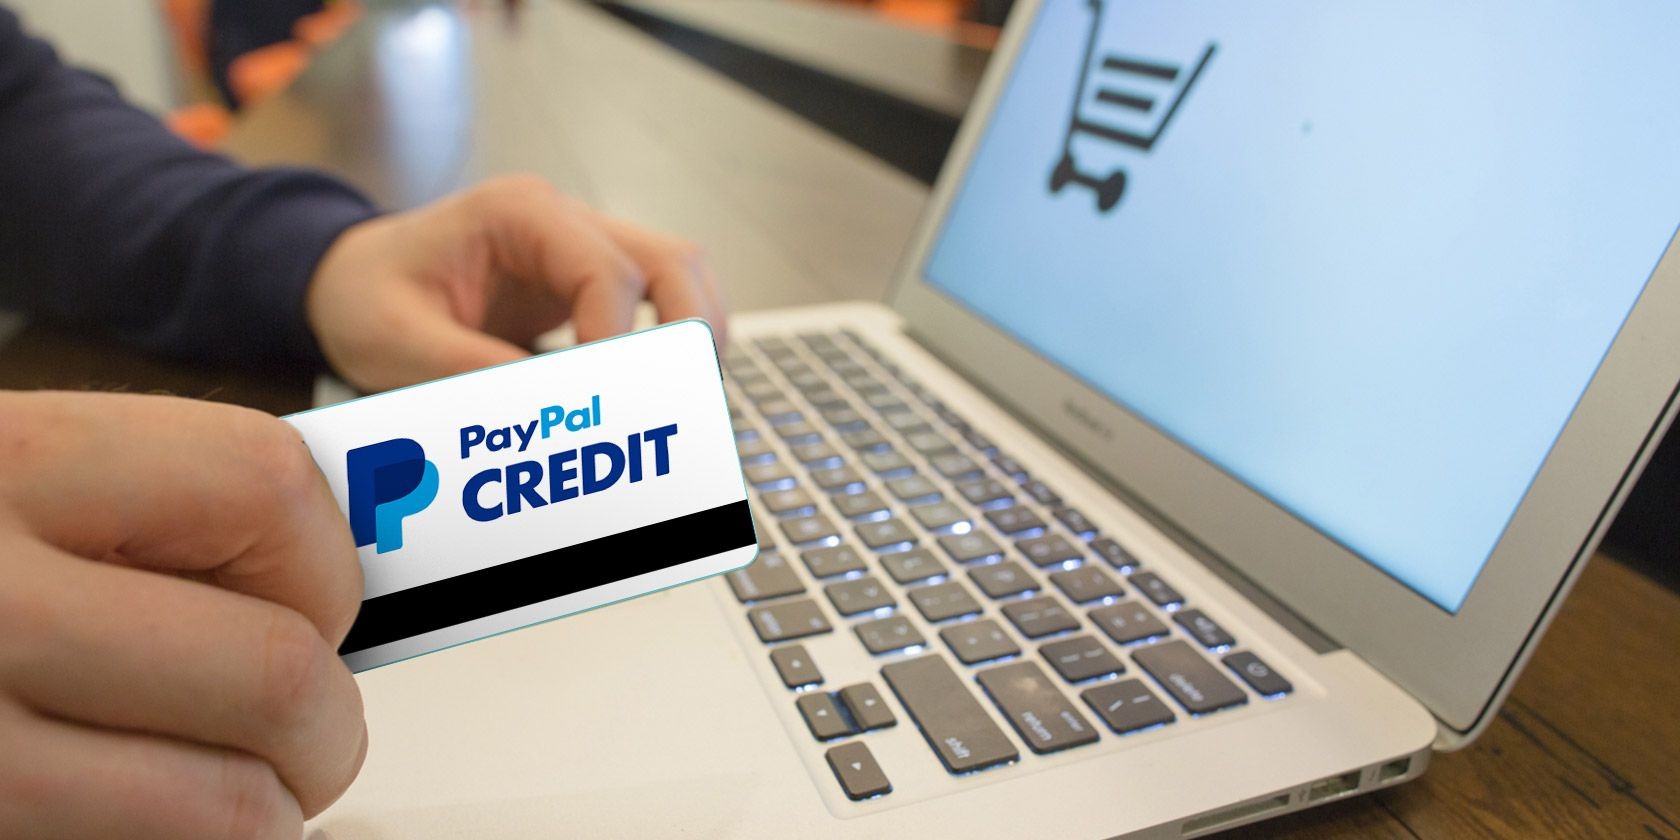 How To Use PayPal Credit